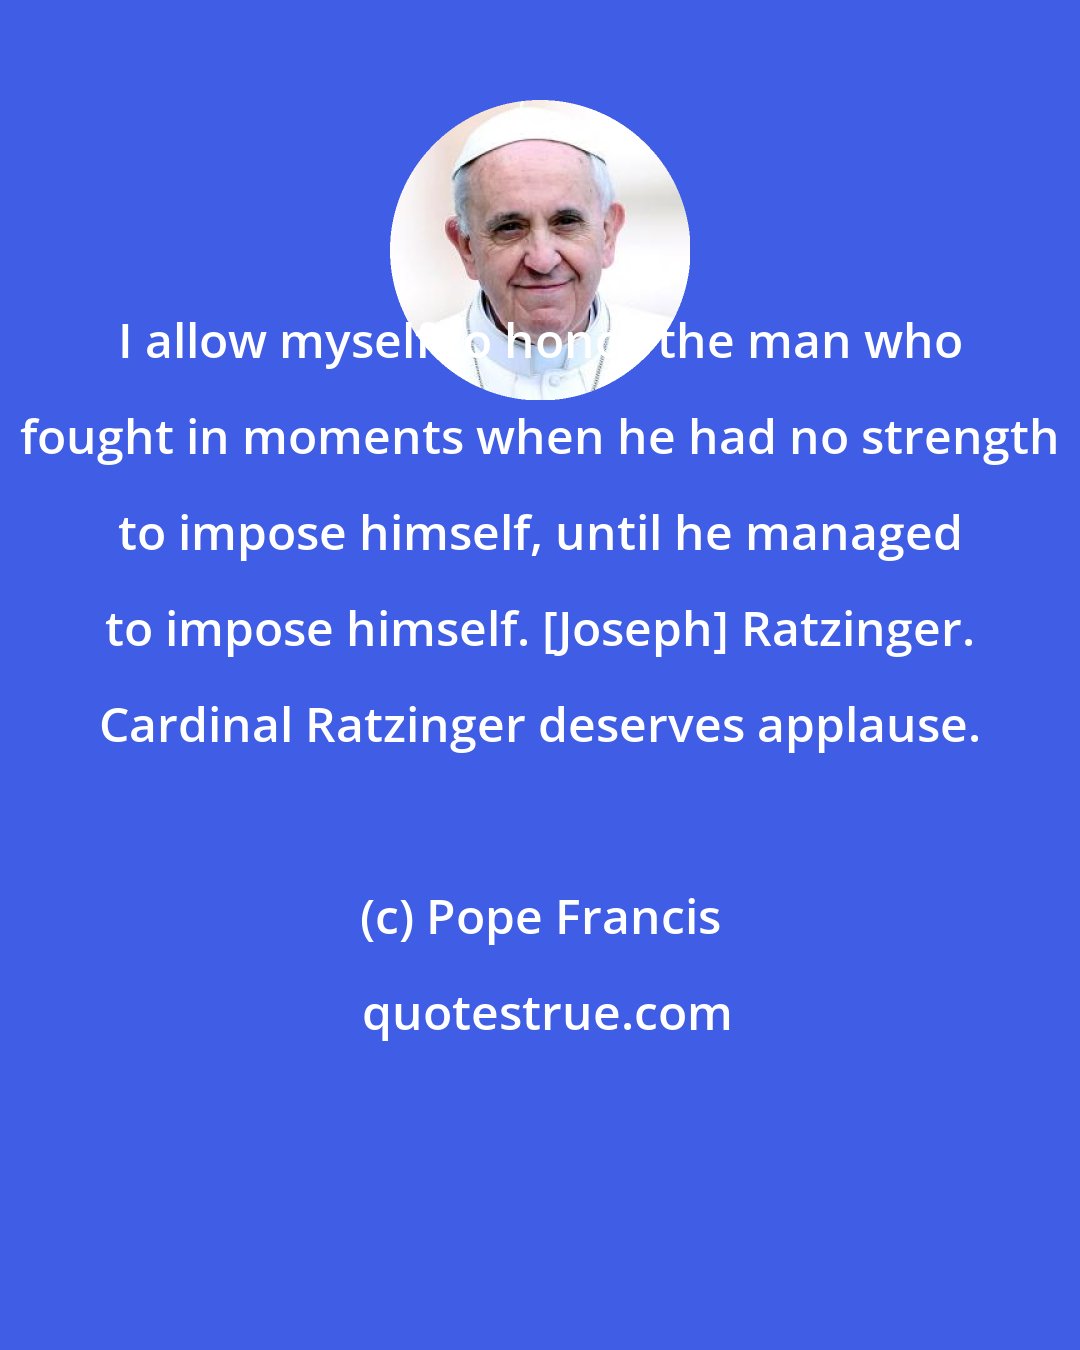 Pope Francis: I allow myself to honor the man who fought in moments when he had no strength to impose himself, until he managed to impose himself. [Joseph] Ratzinger. Cardinal Ratzinger deserves applause.